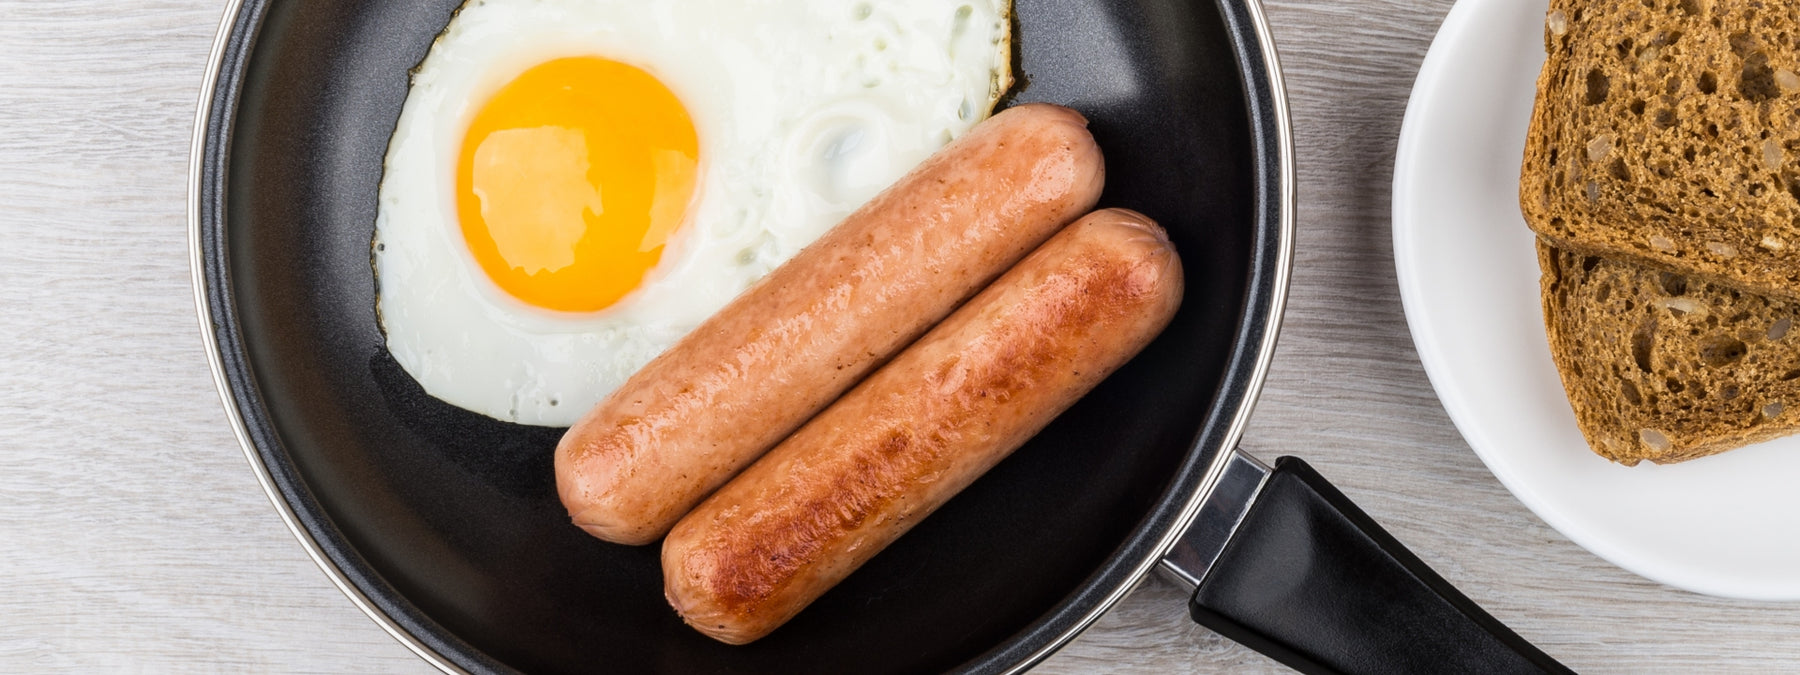 Are Non-Stick Frying Pans Shrinking Your Penis?